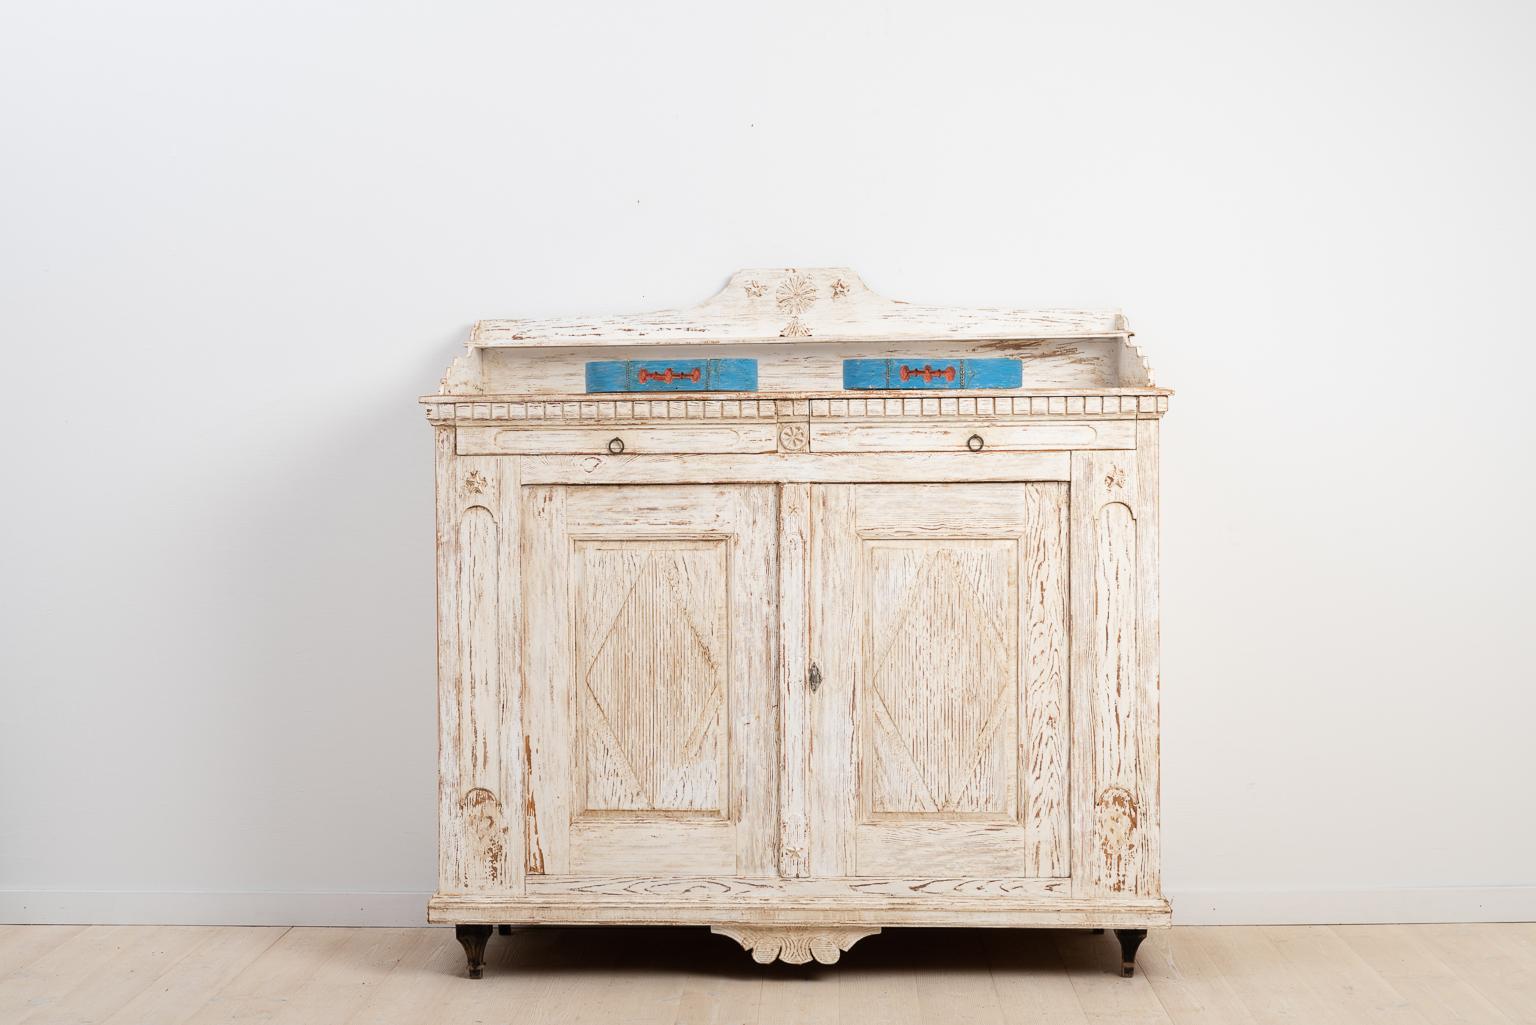 Swedish Gustavian sideboard from Sidensjö, Ångermanland. Old historic distressed paint from the early 1900s. The sideboard was manufactured during the late 1700s. The key and lock are original and functional.